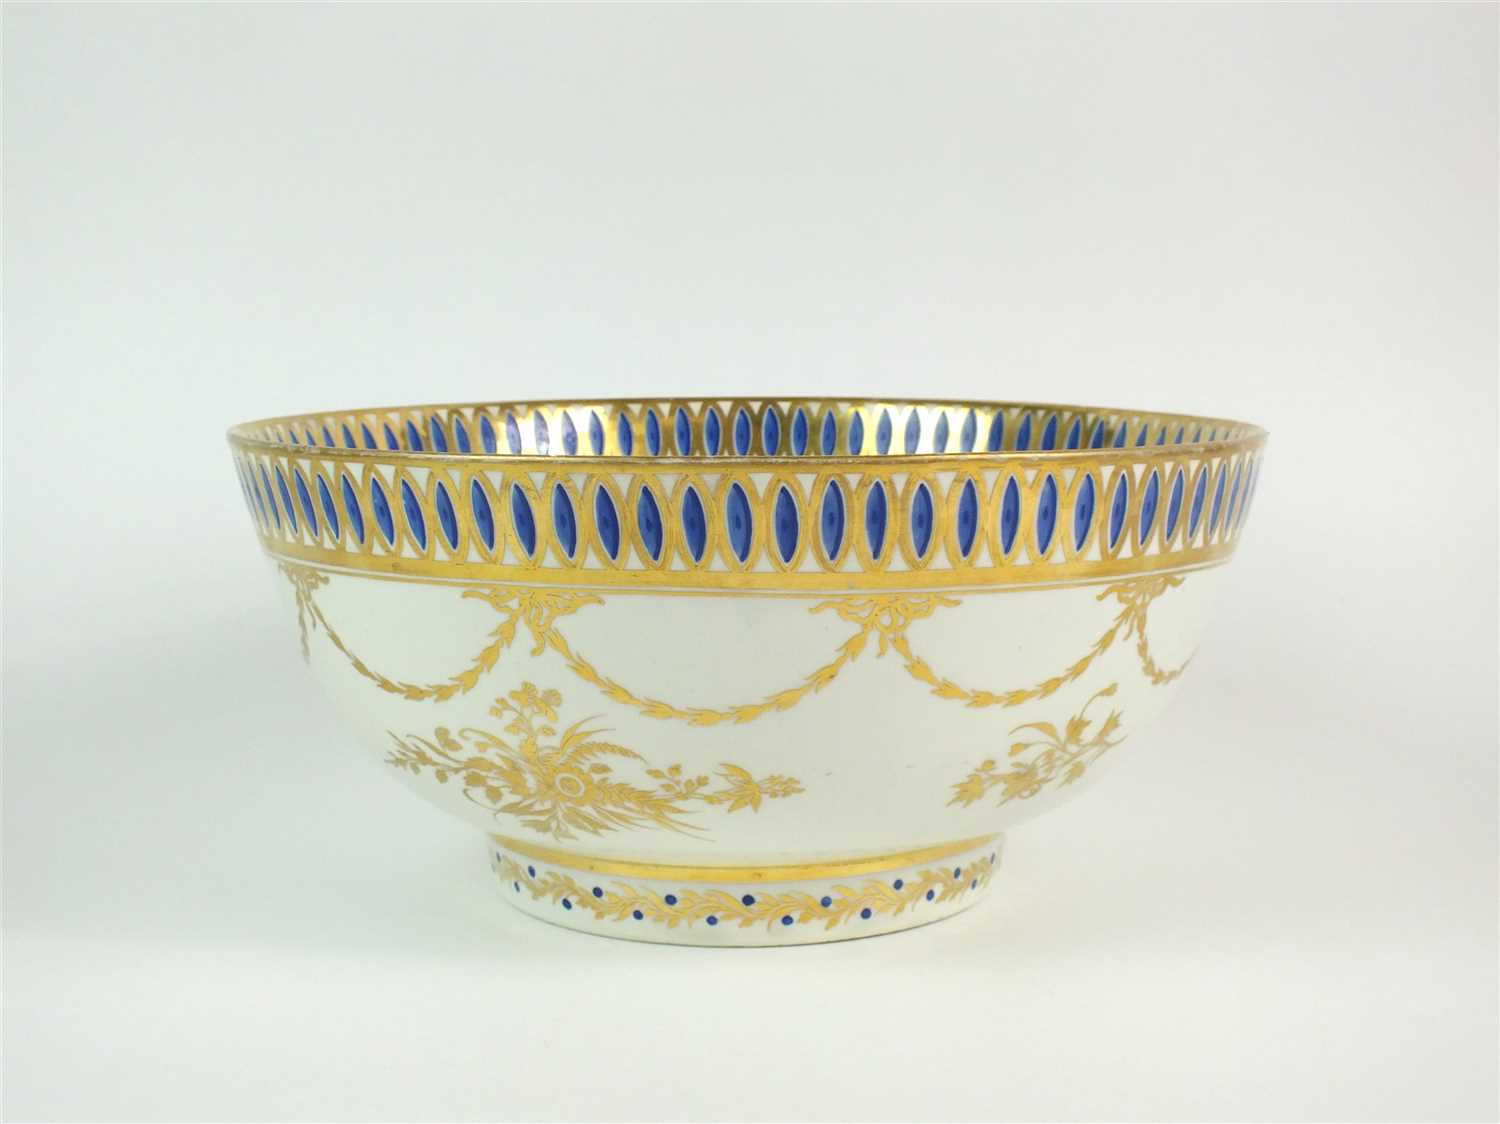 A rare Caughley polychrome George IV Prince of Wales punch bowl